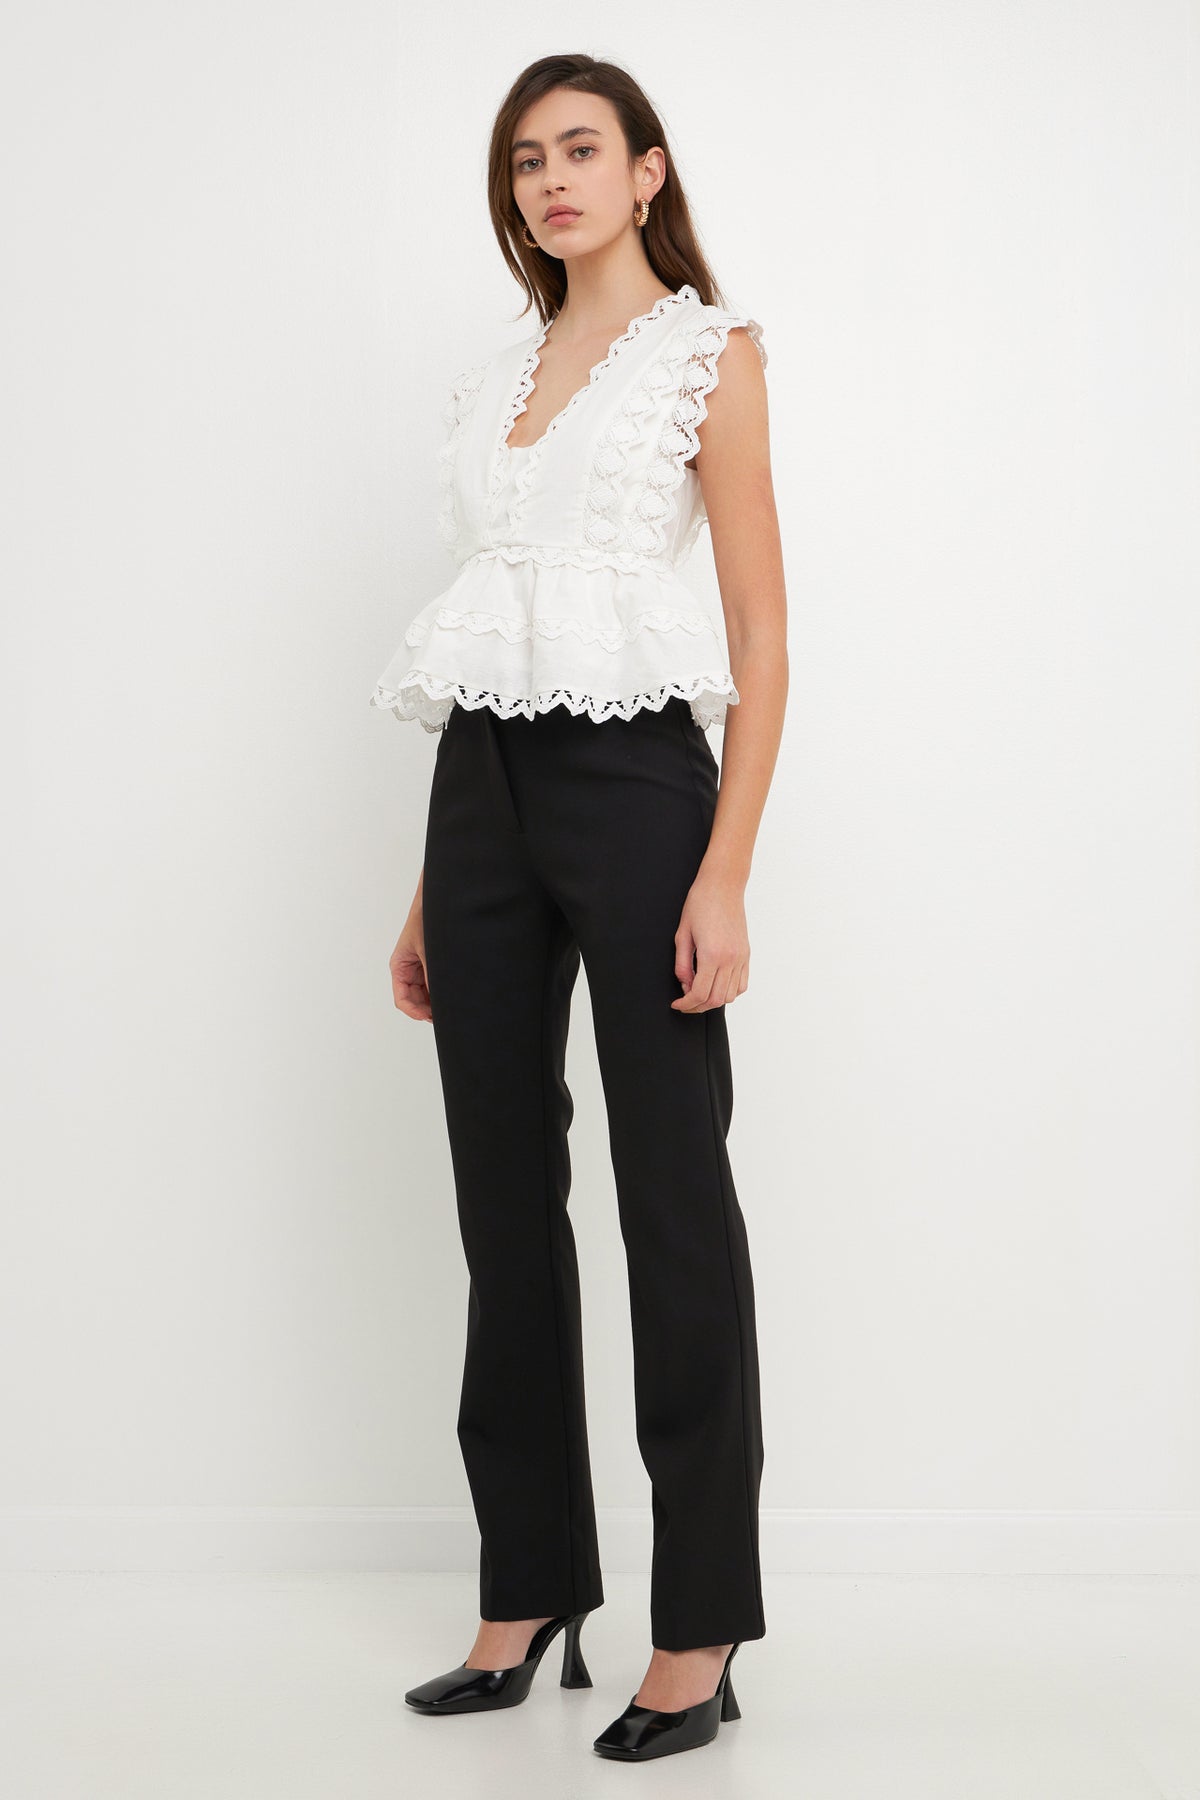 ENDLESS ROSE - Trim Detail Top - TOPS available at Objectrare